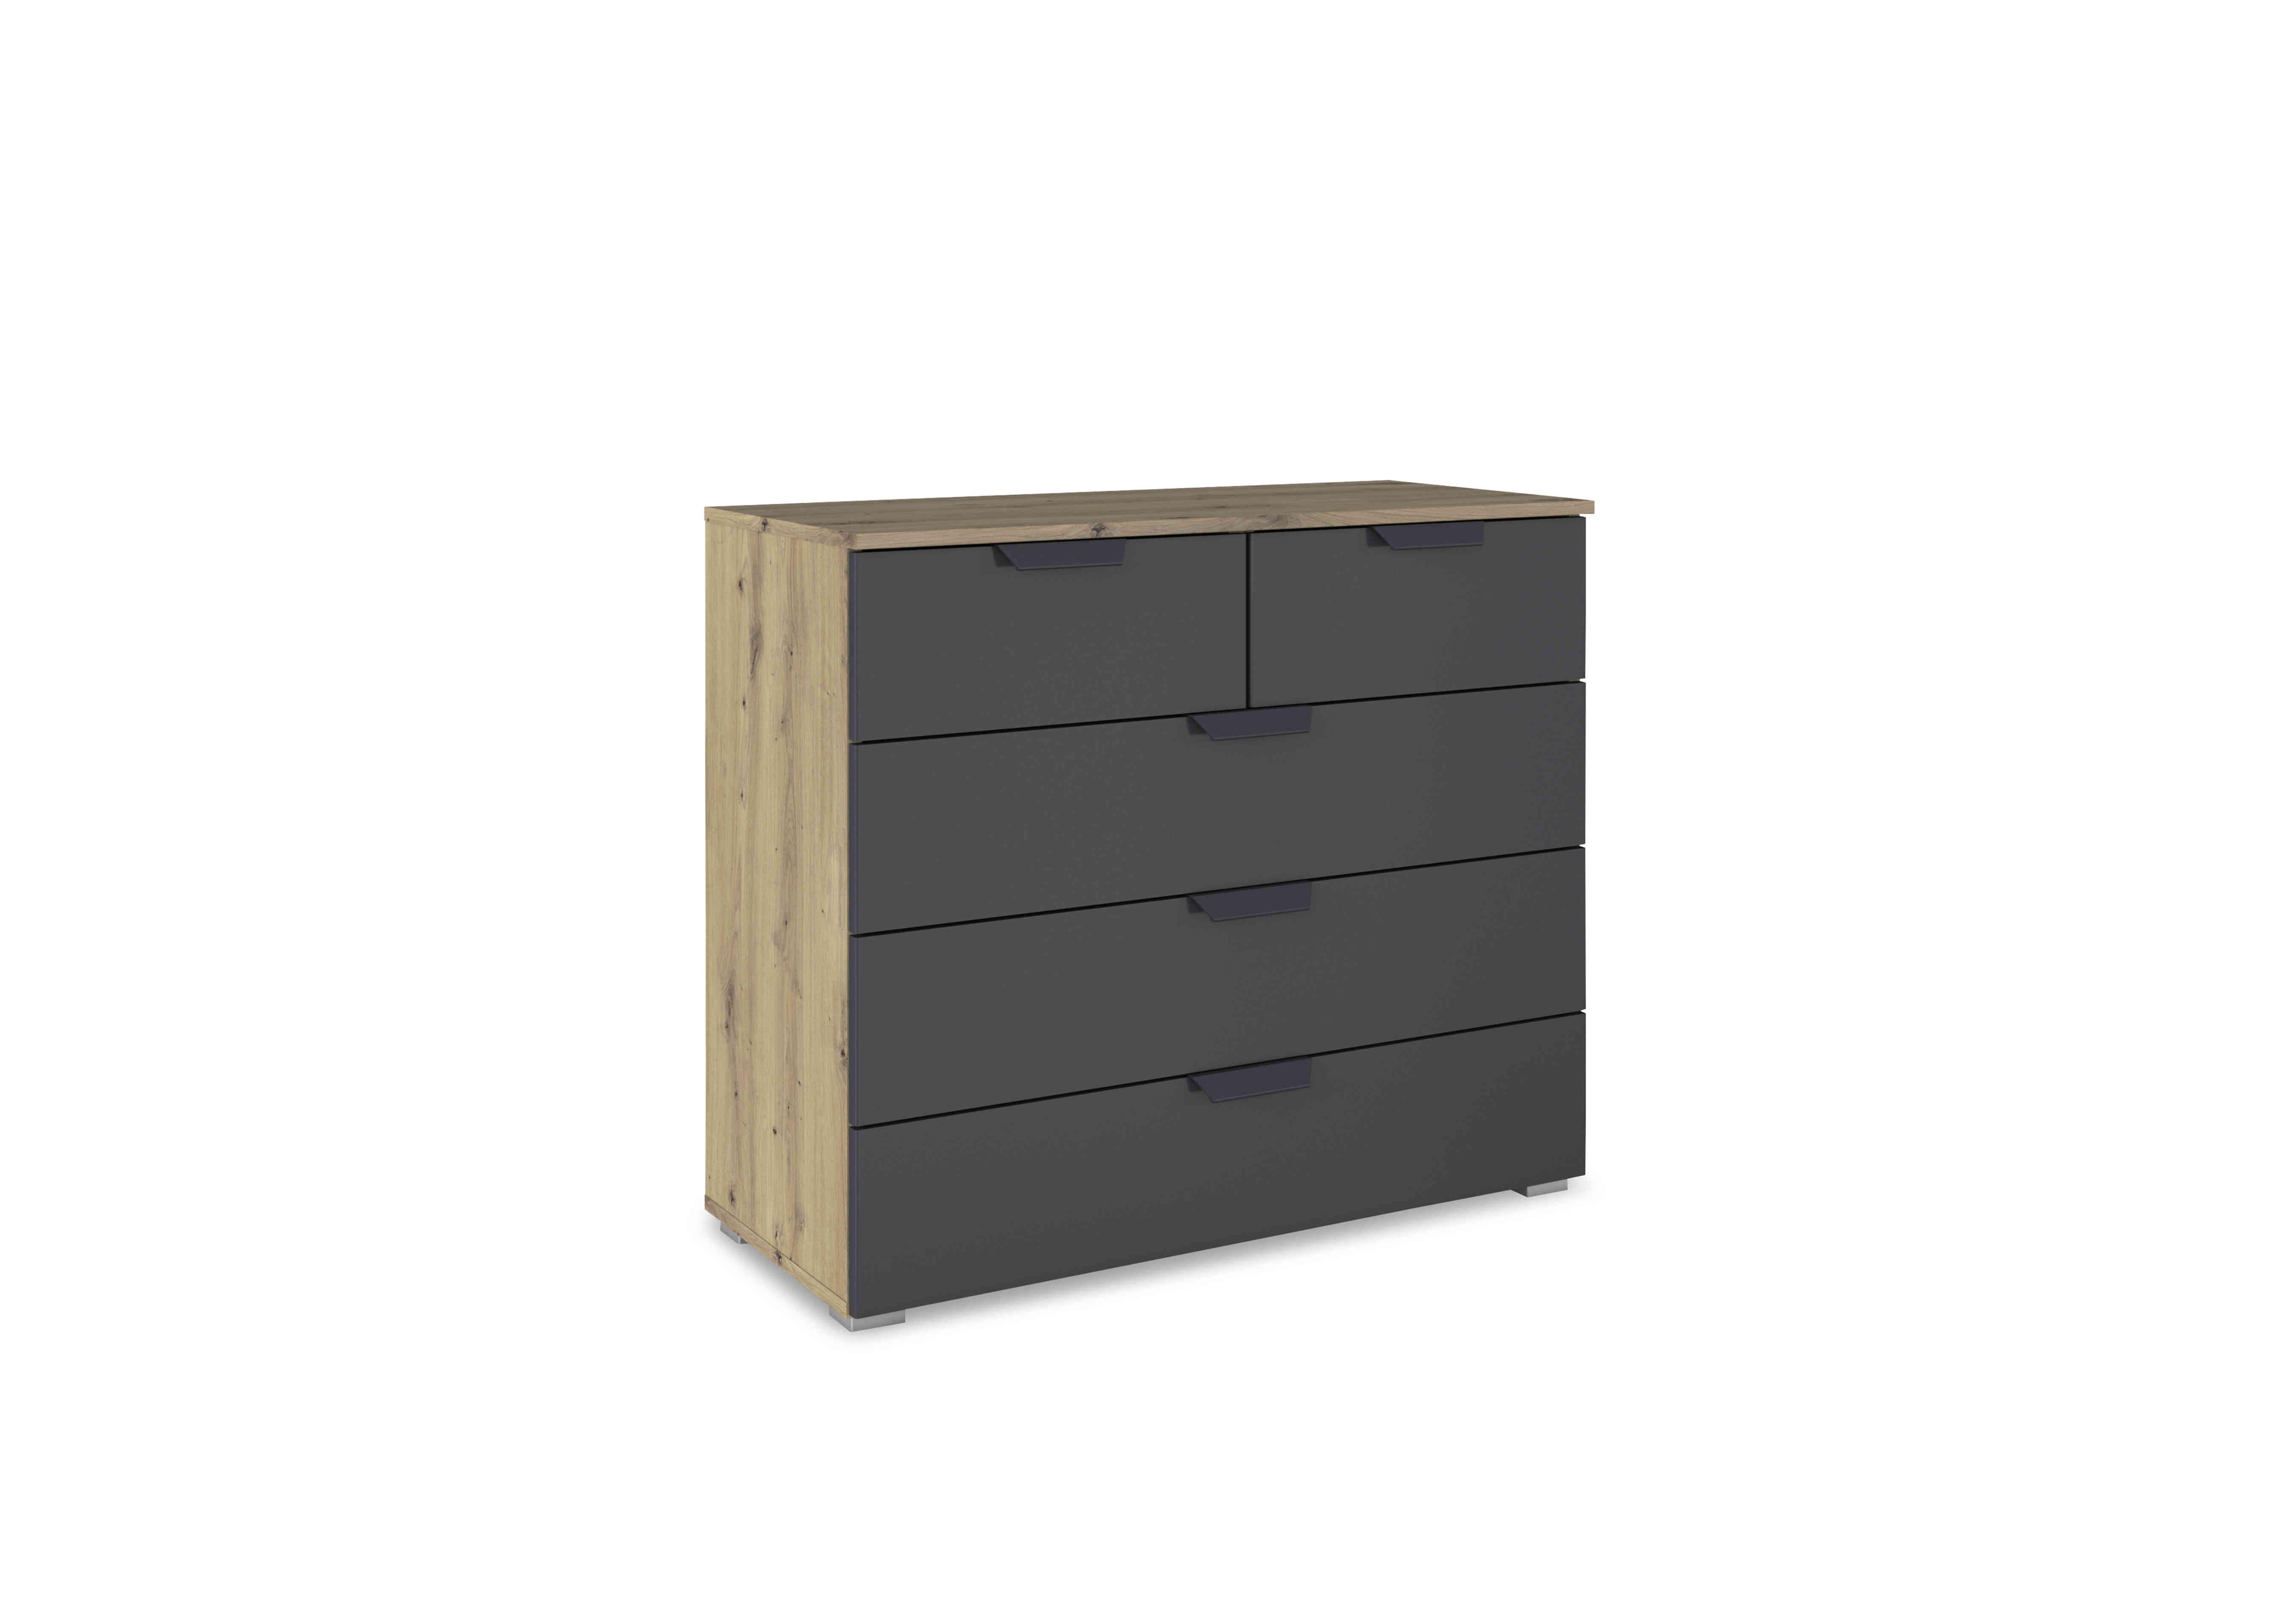 Leon 2+3 Drawer Chest of Drawers in Ad60w Grey Drs-Art Oak Carcase on Furniture Village